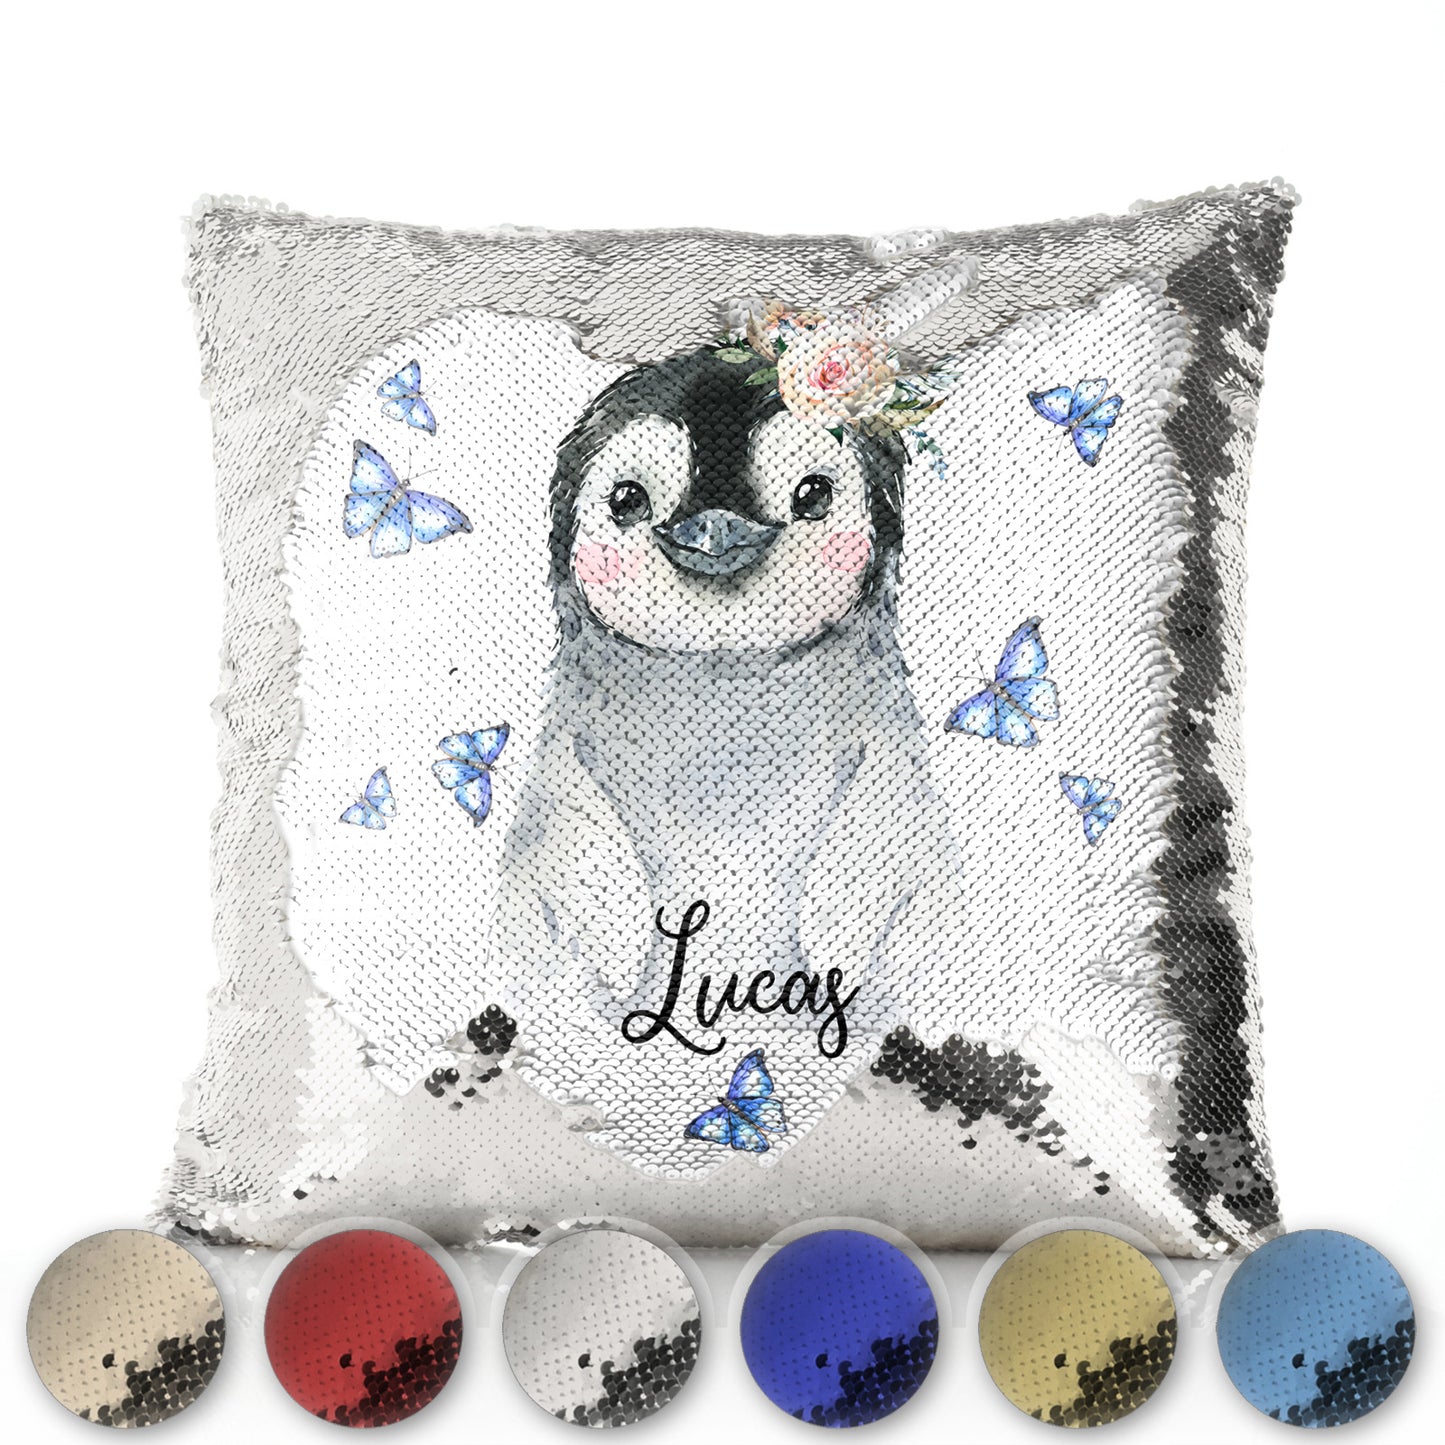 Personalised Sequin Cushion with Grey Penguin Blue Butterflies and Cute Text